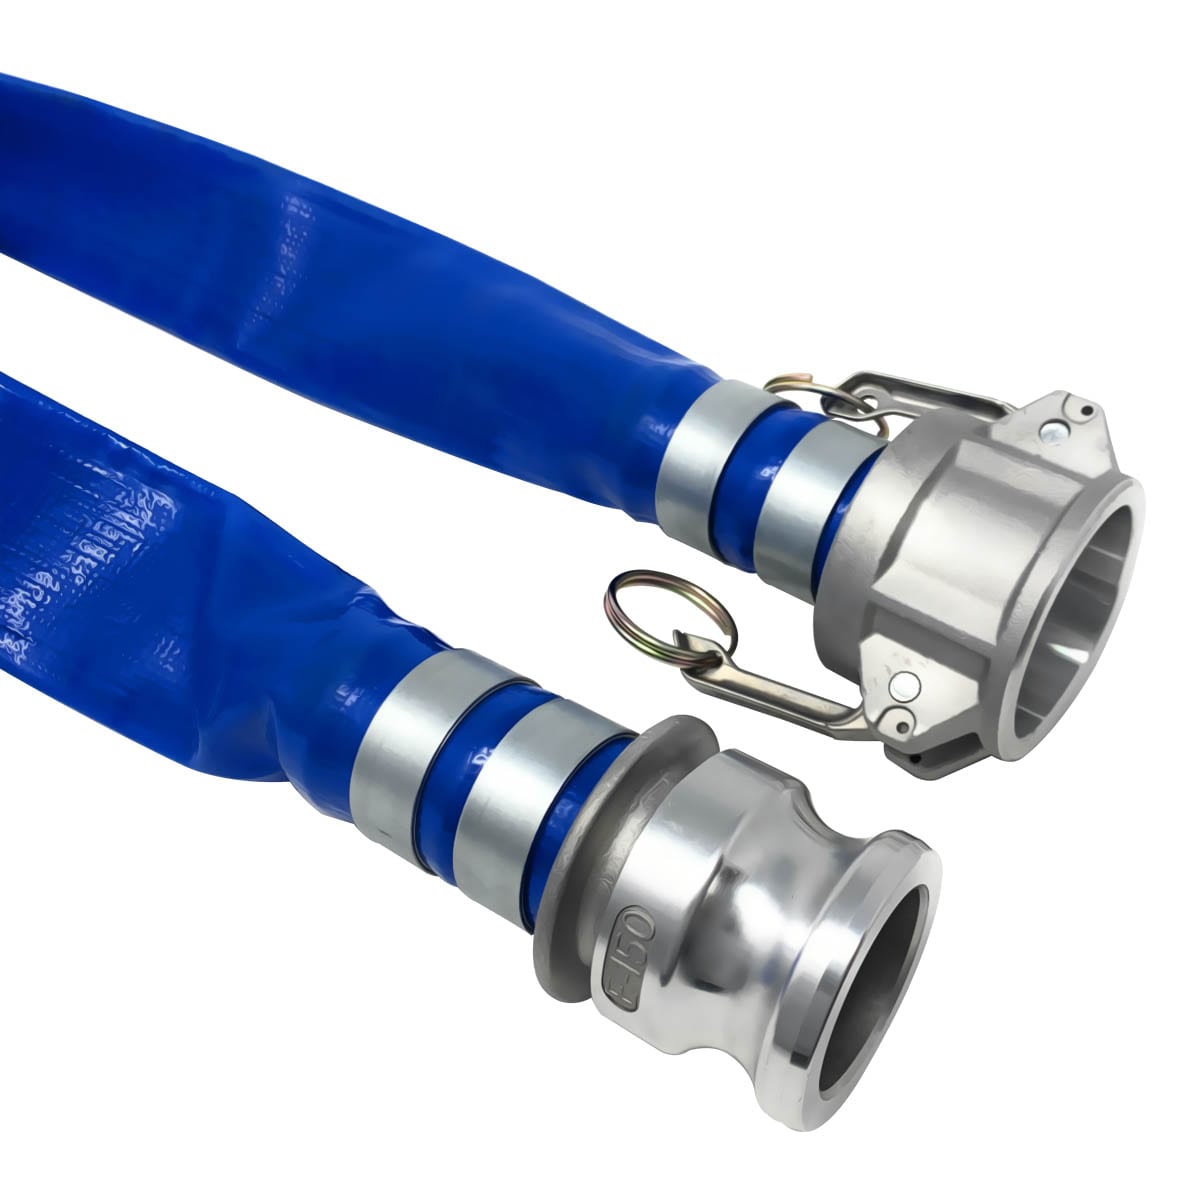 Blue 1-1/2 ID 50 Length Abbott Rubber PVC Discharge Hose Assembly 70 psi Max Pressure 1-1/2 Male X Female Cam And Groove 